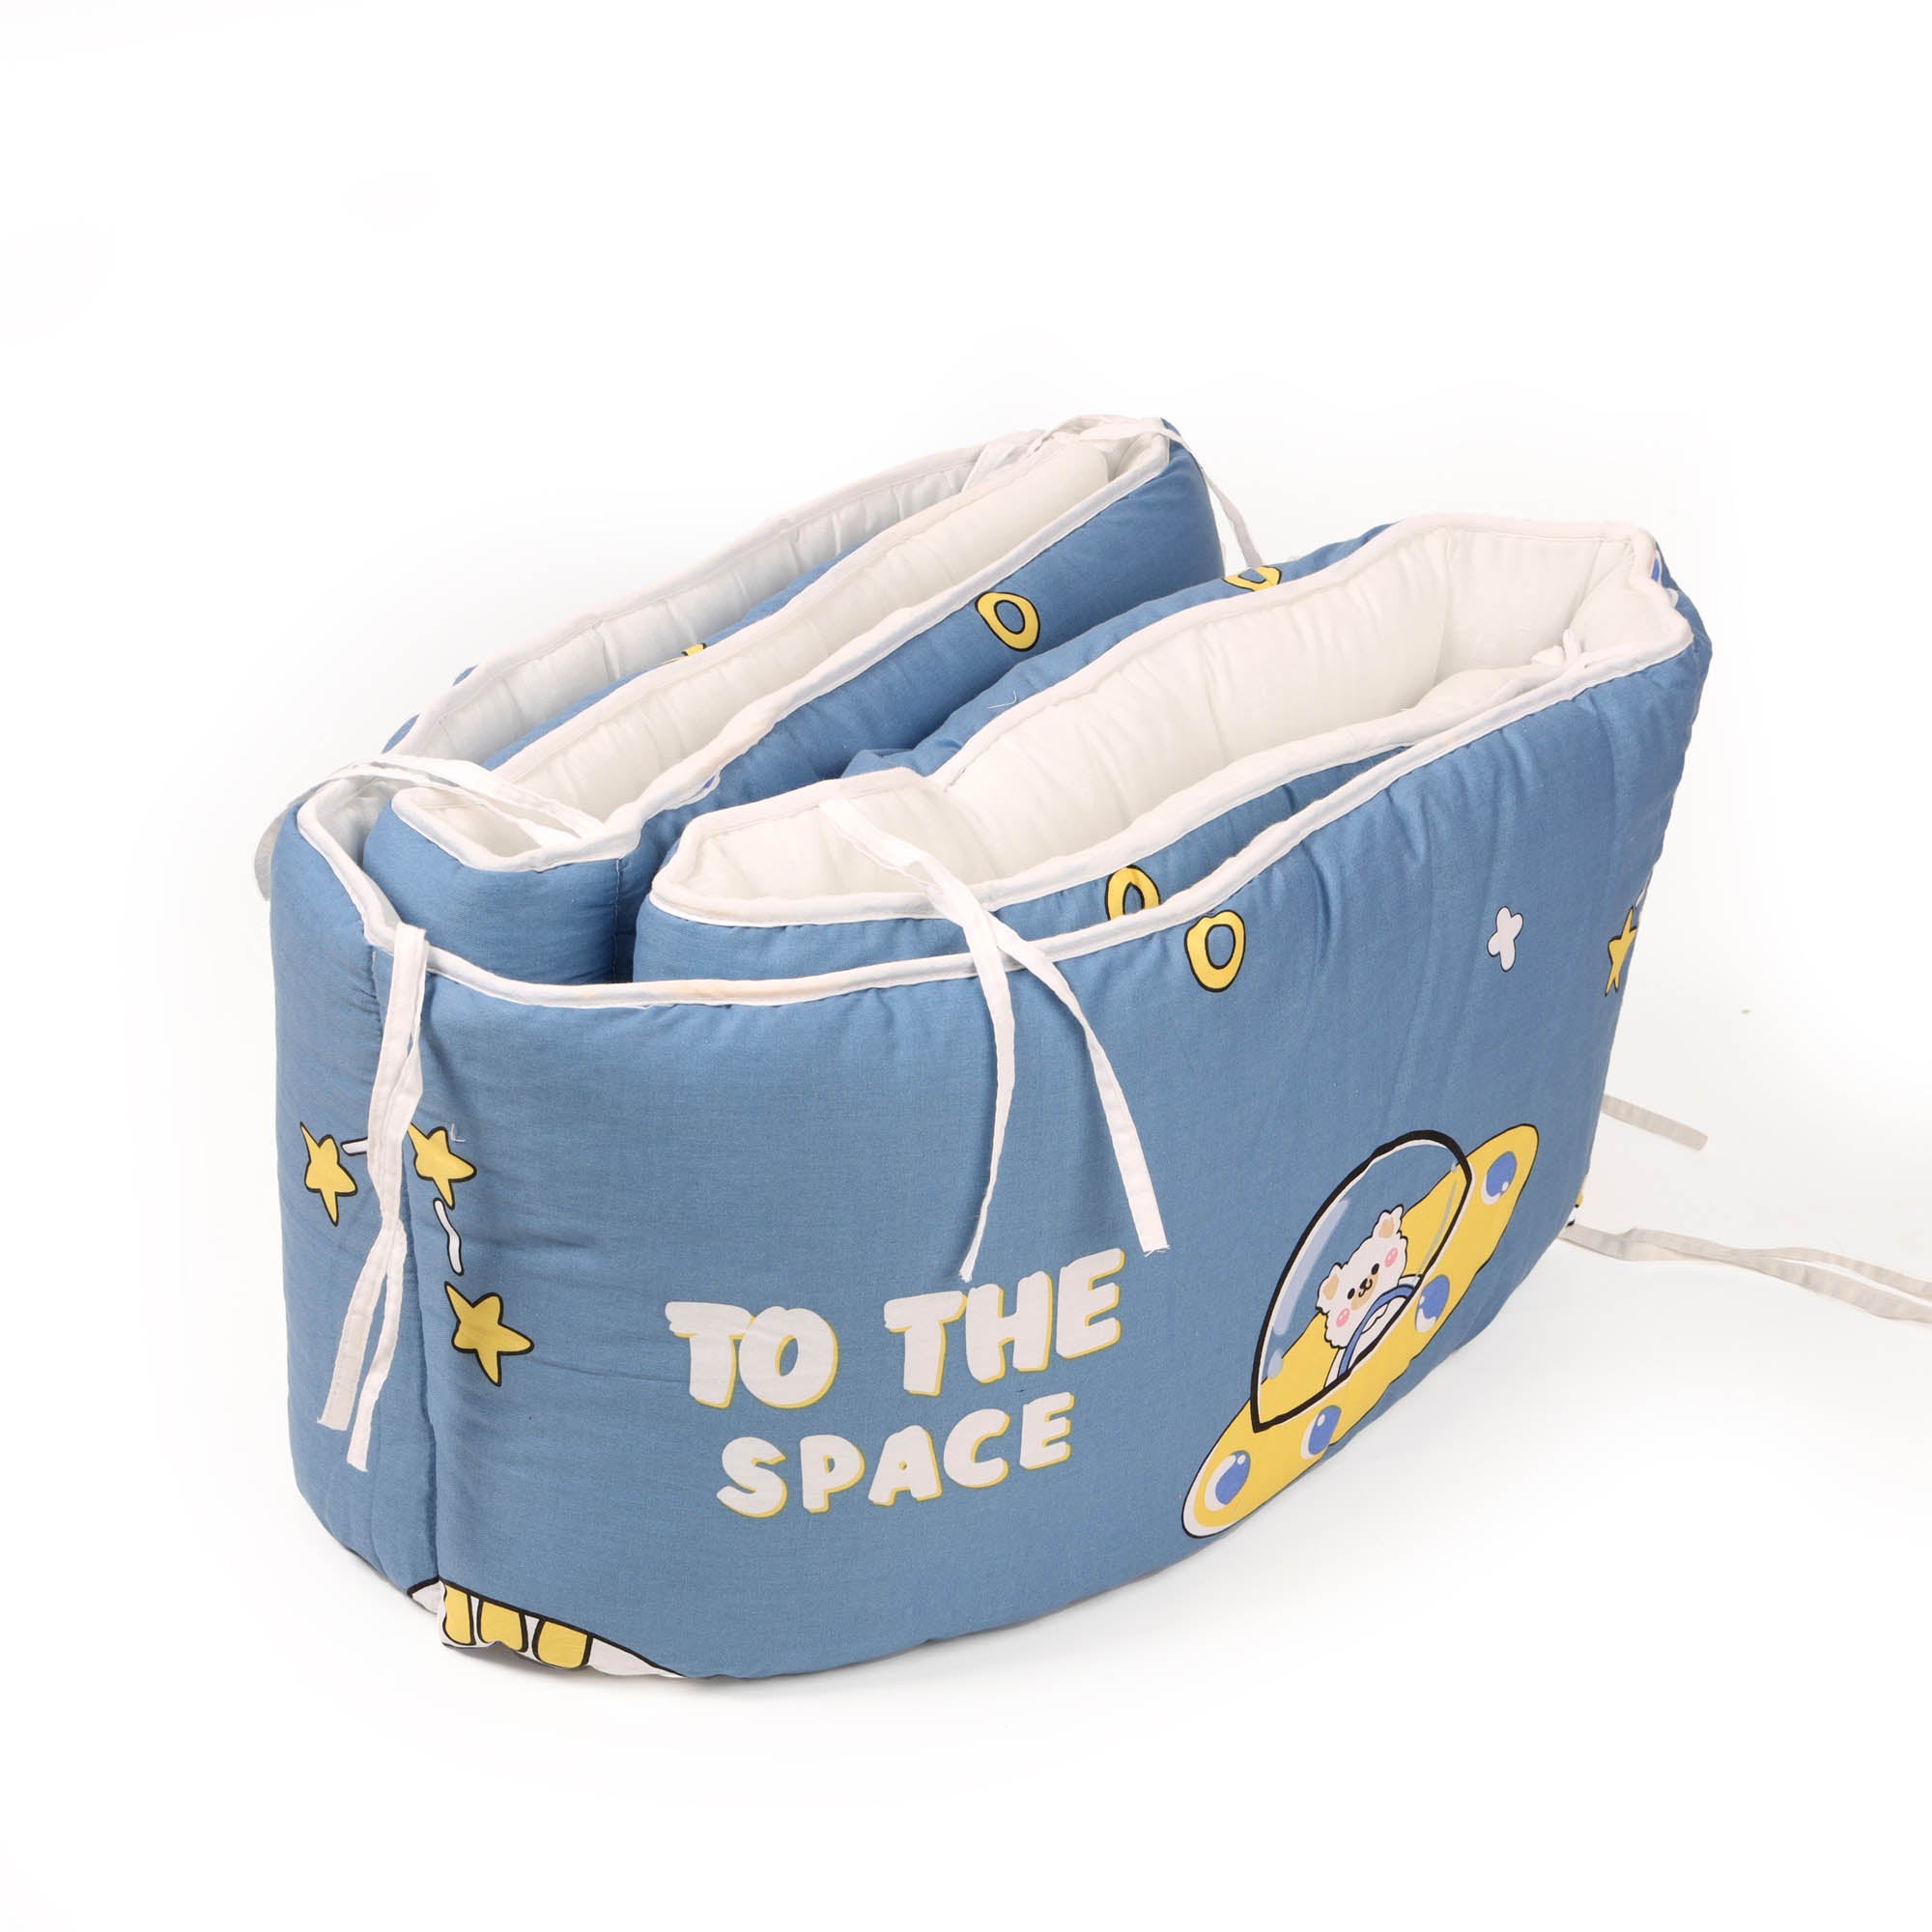 Kicks & Crawl- Baby Space Explorer 5 Pc Quilted Bedding Set - With/Without Bumper